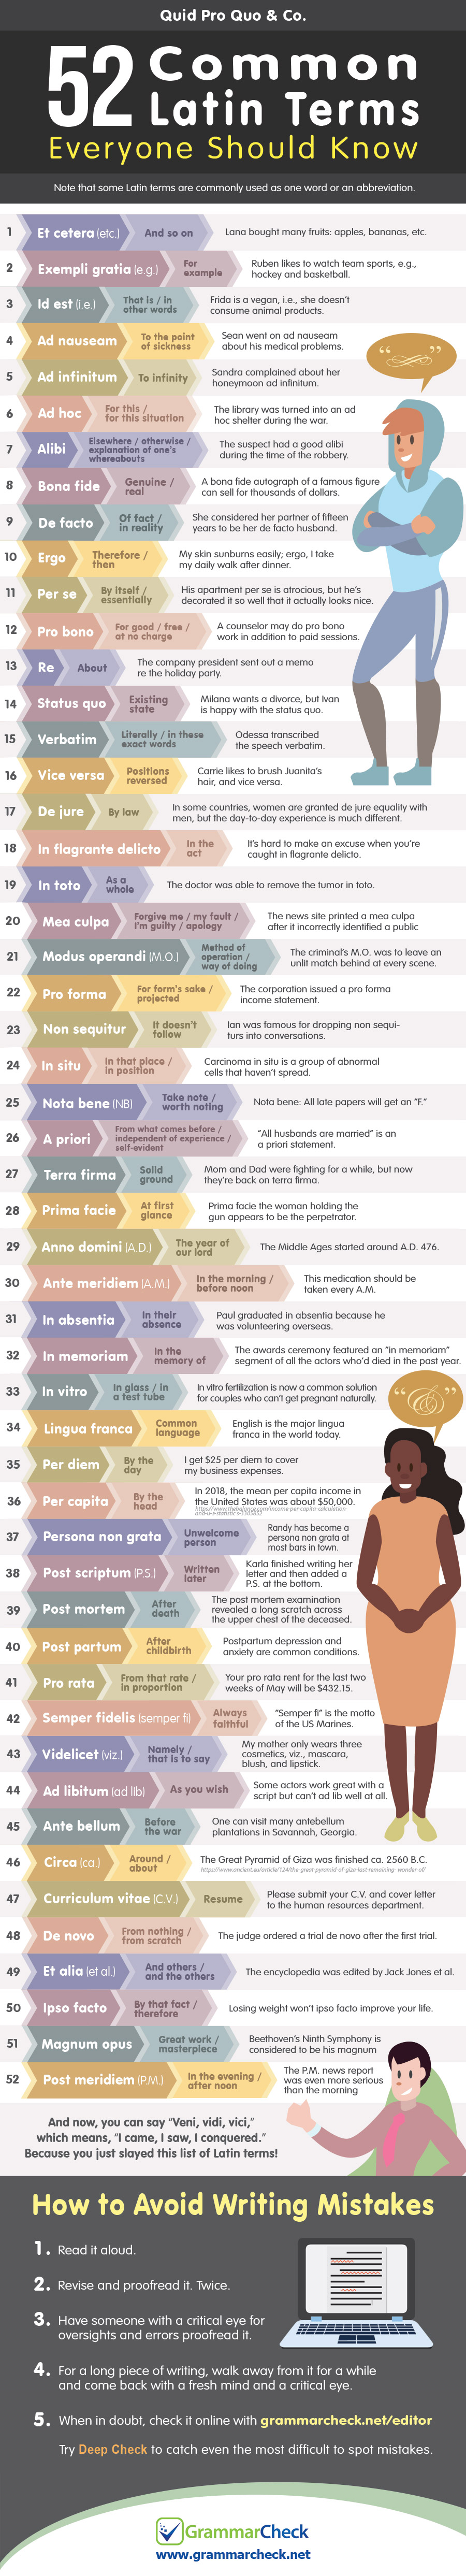 Quid Pro Quo & Co. - 52 Common Latin Terms Everyone Should Know (Infographic)